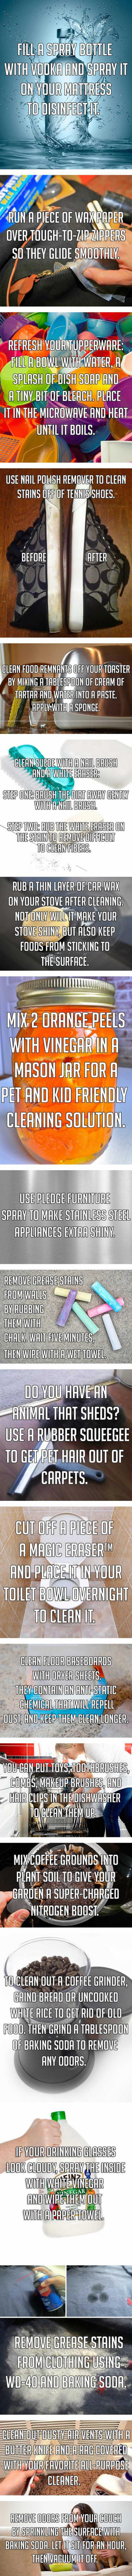 some life hacks funny picture